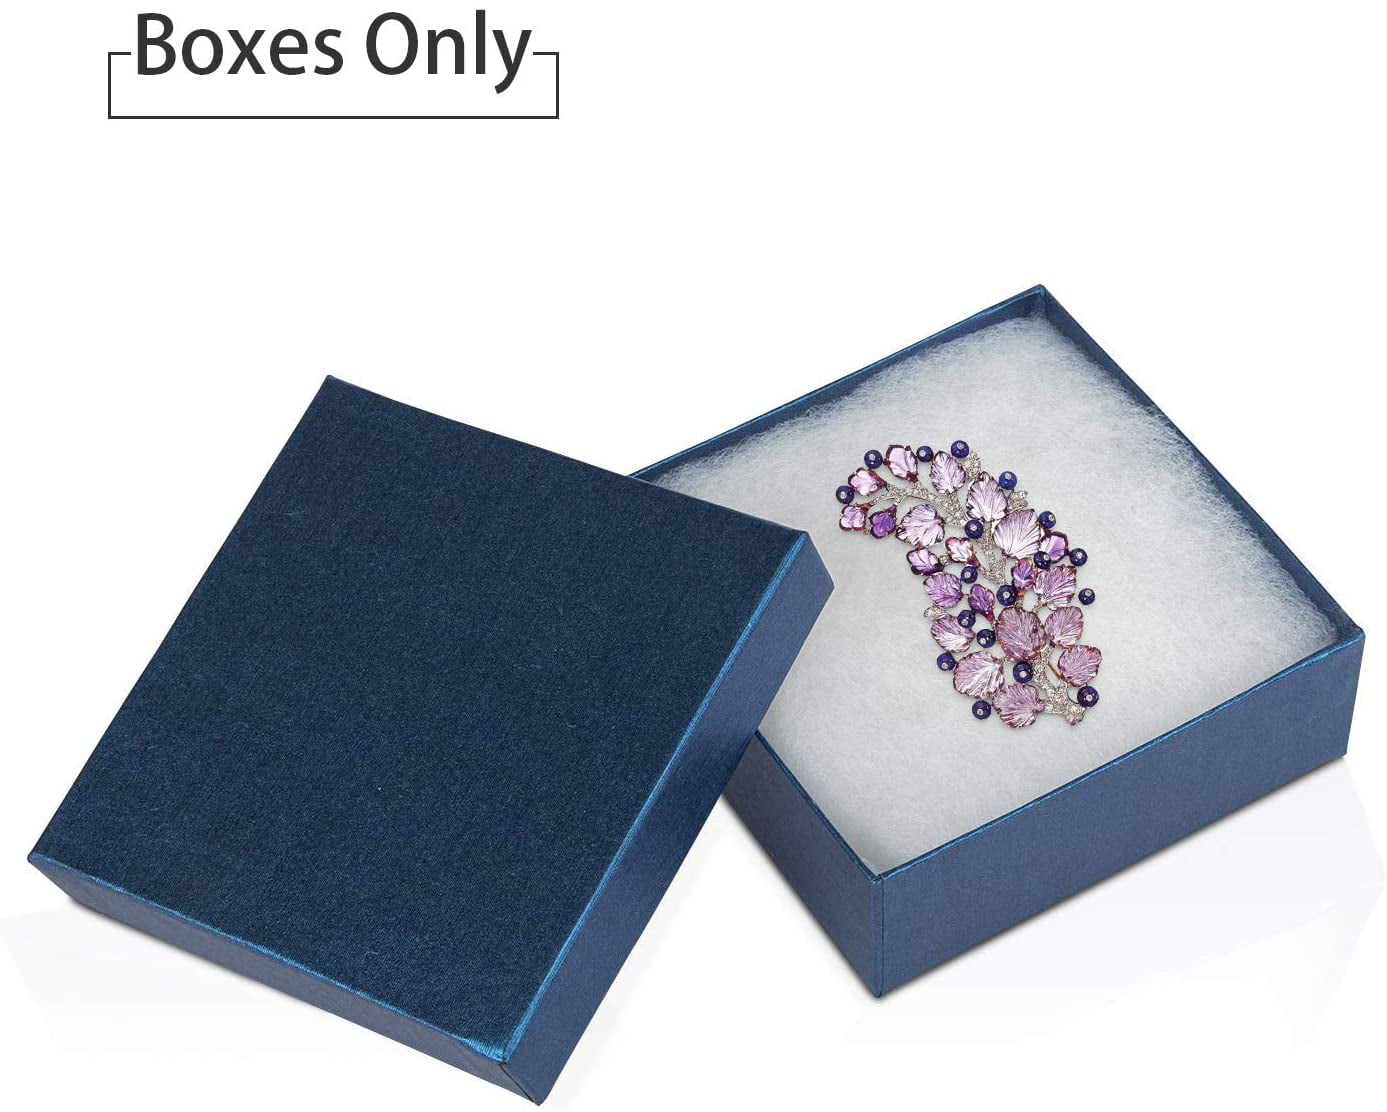 New 100 Gold Cotton Filled jewelry Gift Boxes Size 2 18 X 1 58